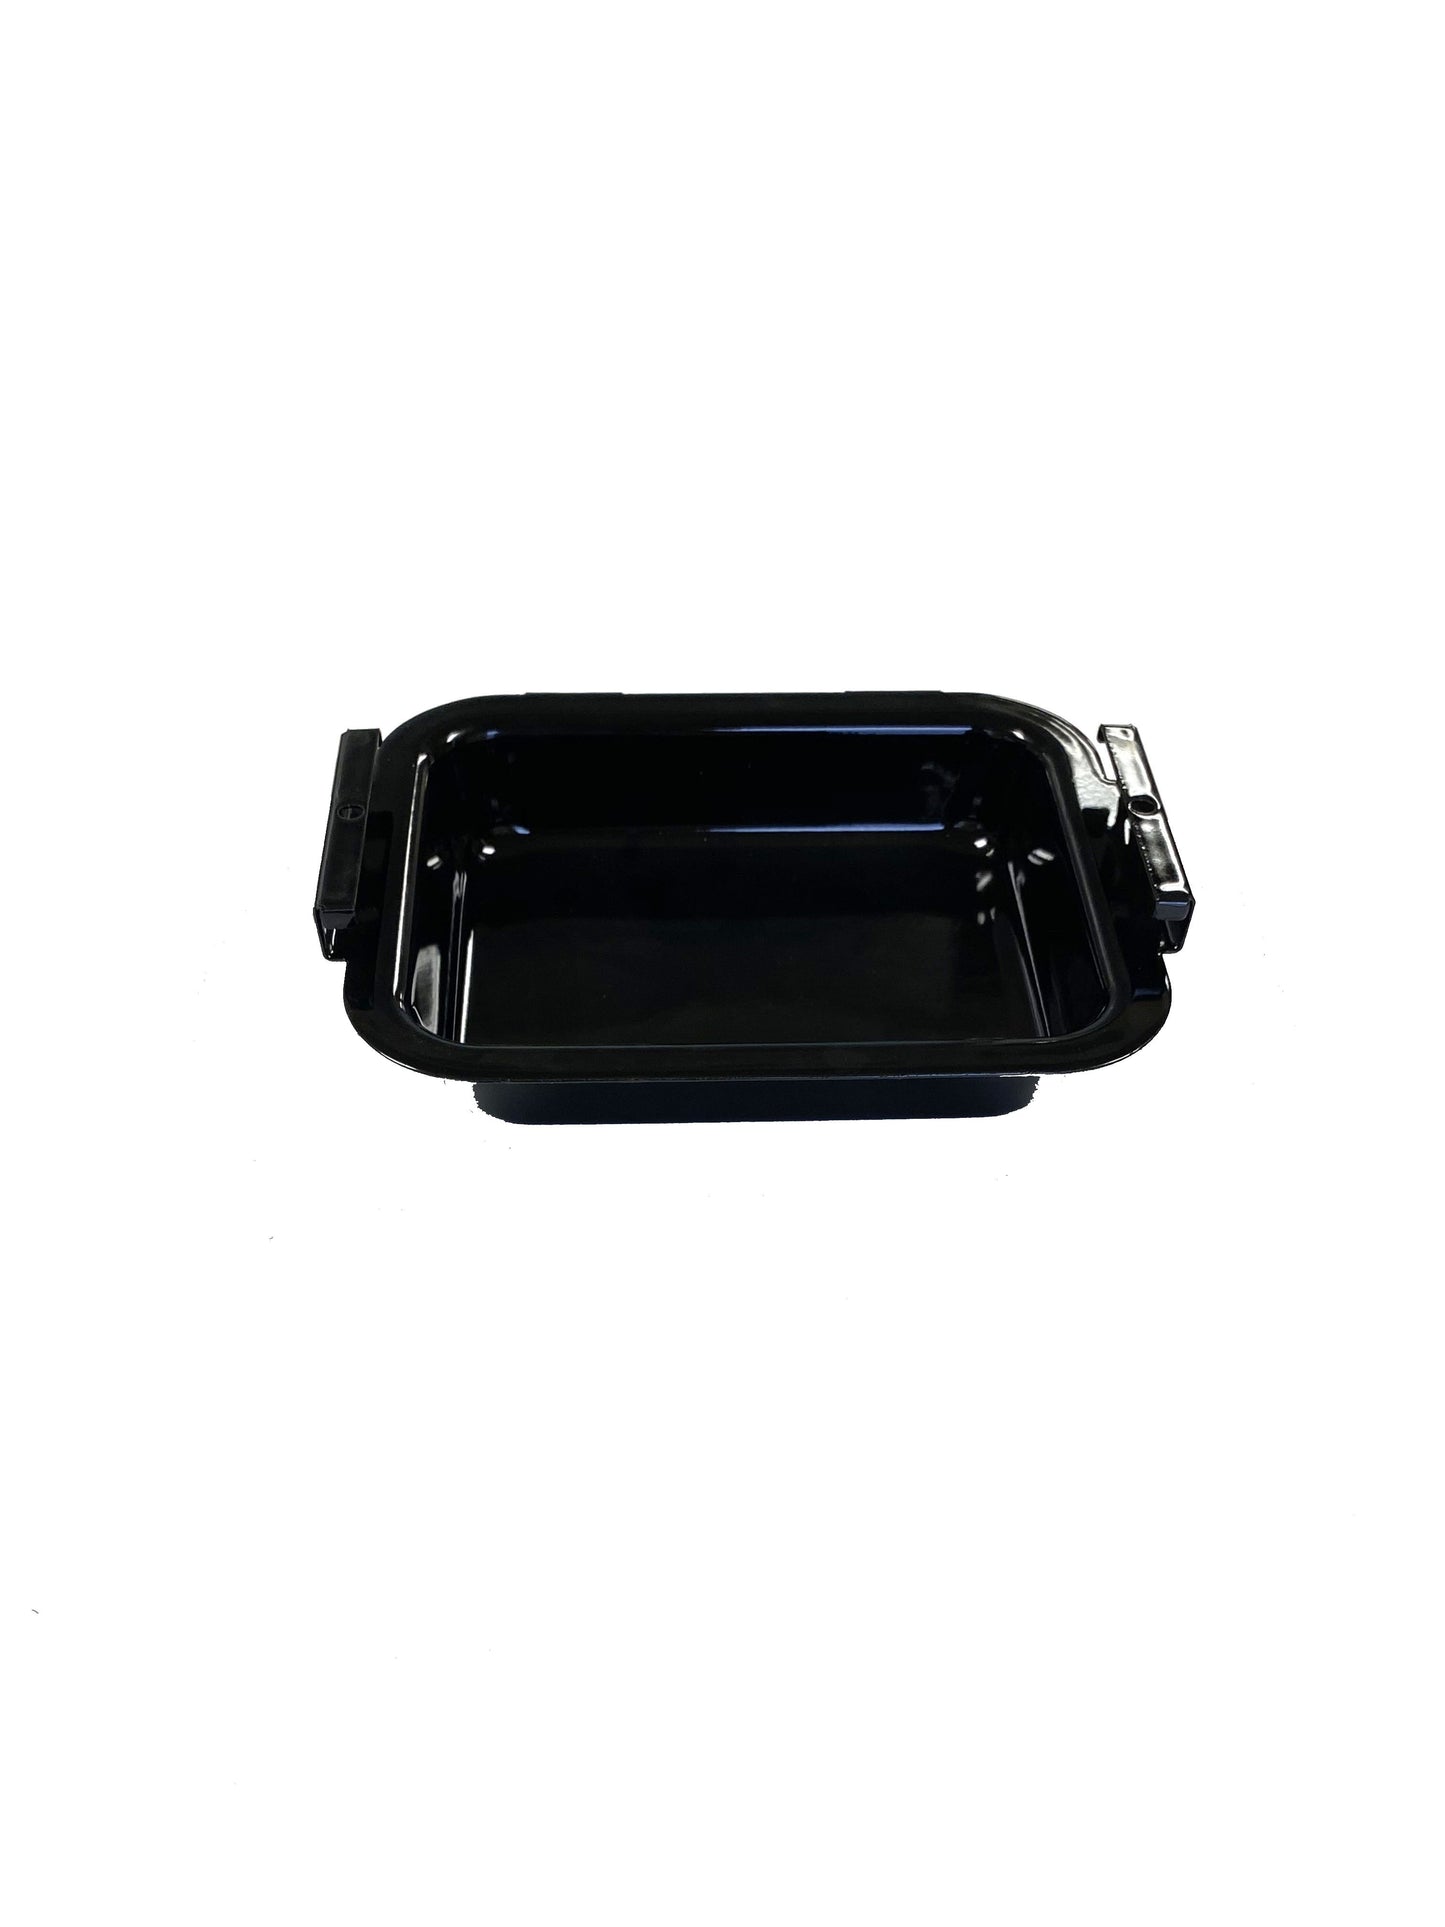 Broil King 22009901 formed grease pan. Acting as the hard pan that the aluminum foil tray rests in, this is one of the most important pieces to your grill. Ensuring you don’t get a cart full of grease! Available with Barbecues Galore